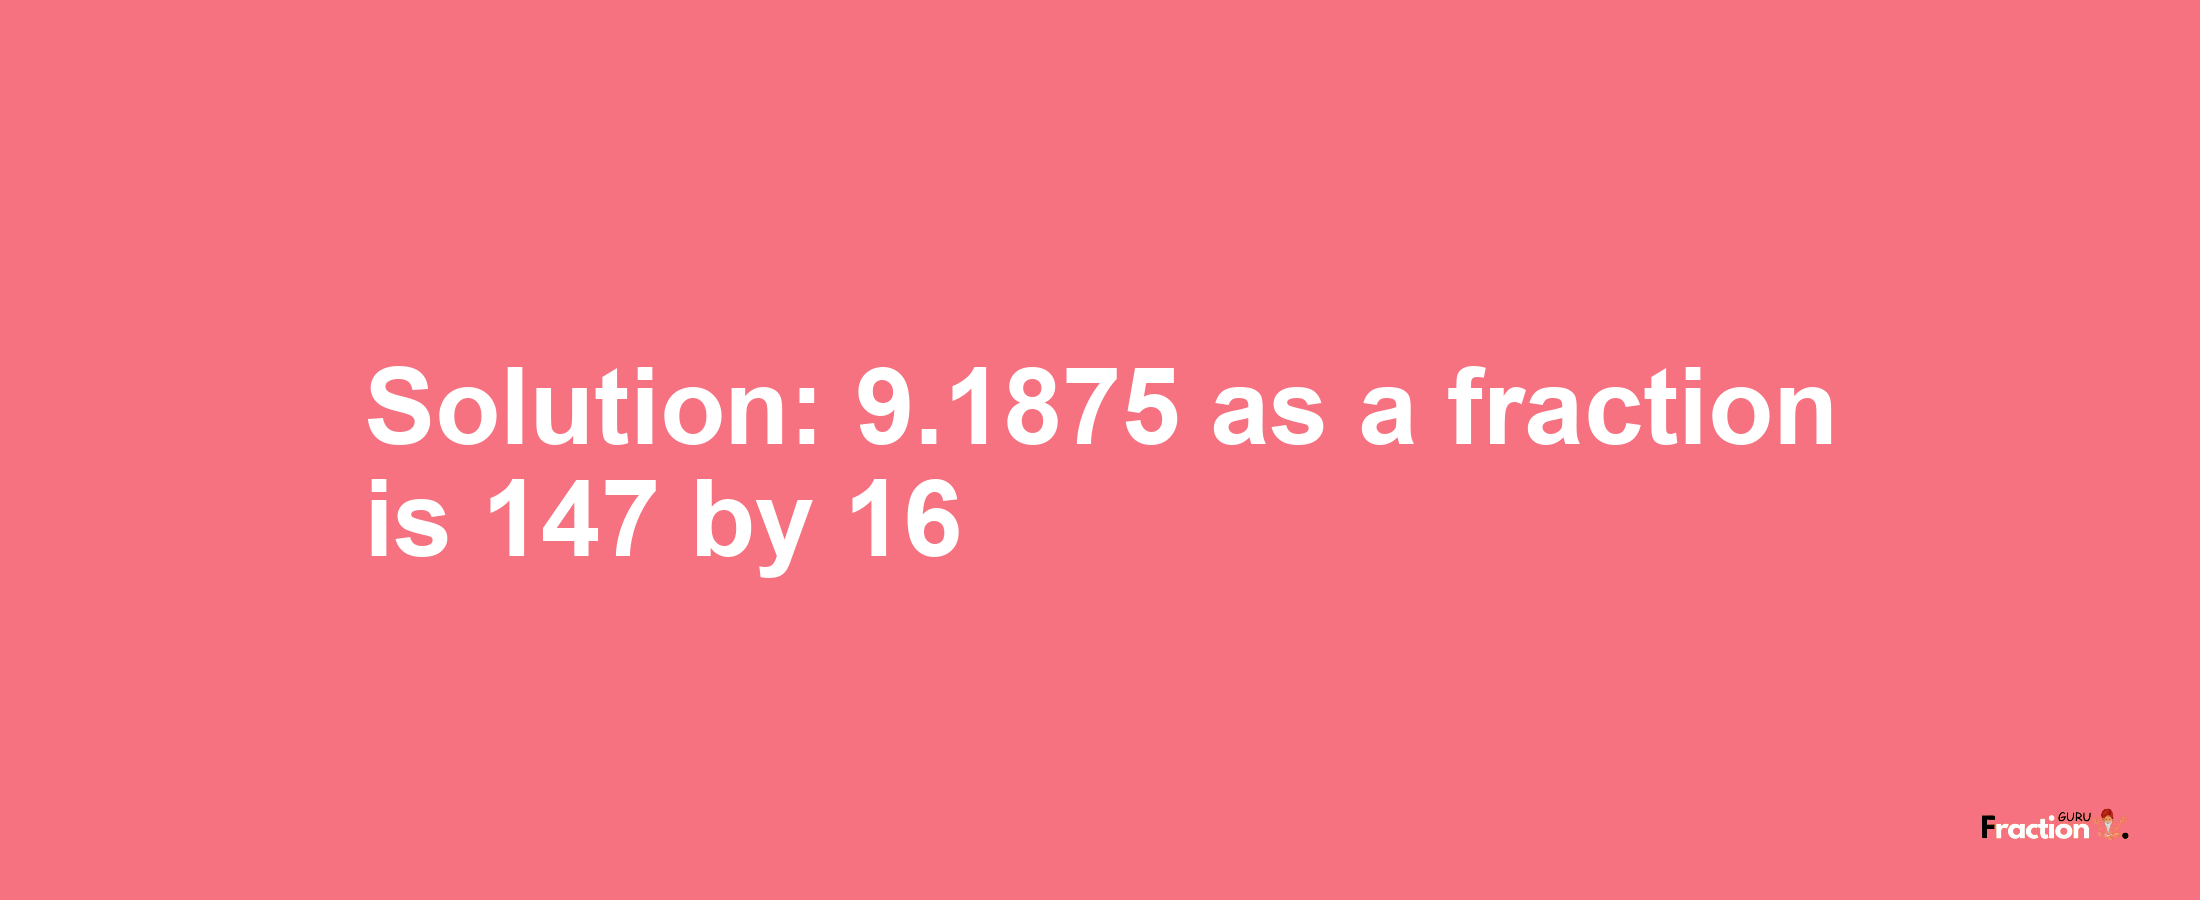 Solution:9.1875 as a fraction is 147/16